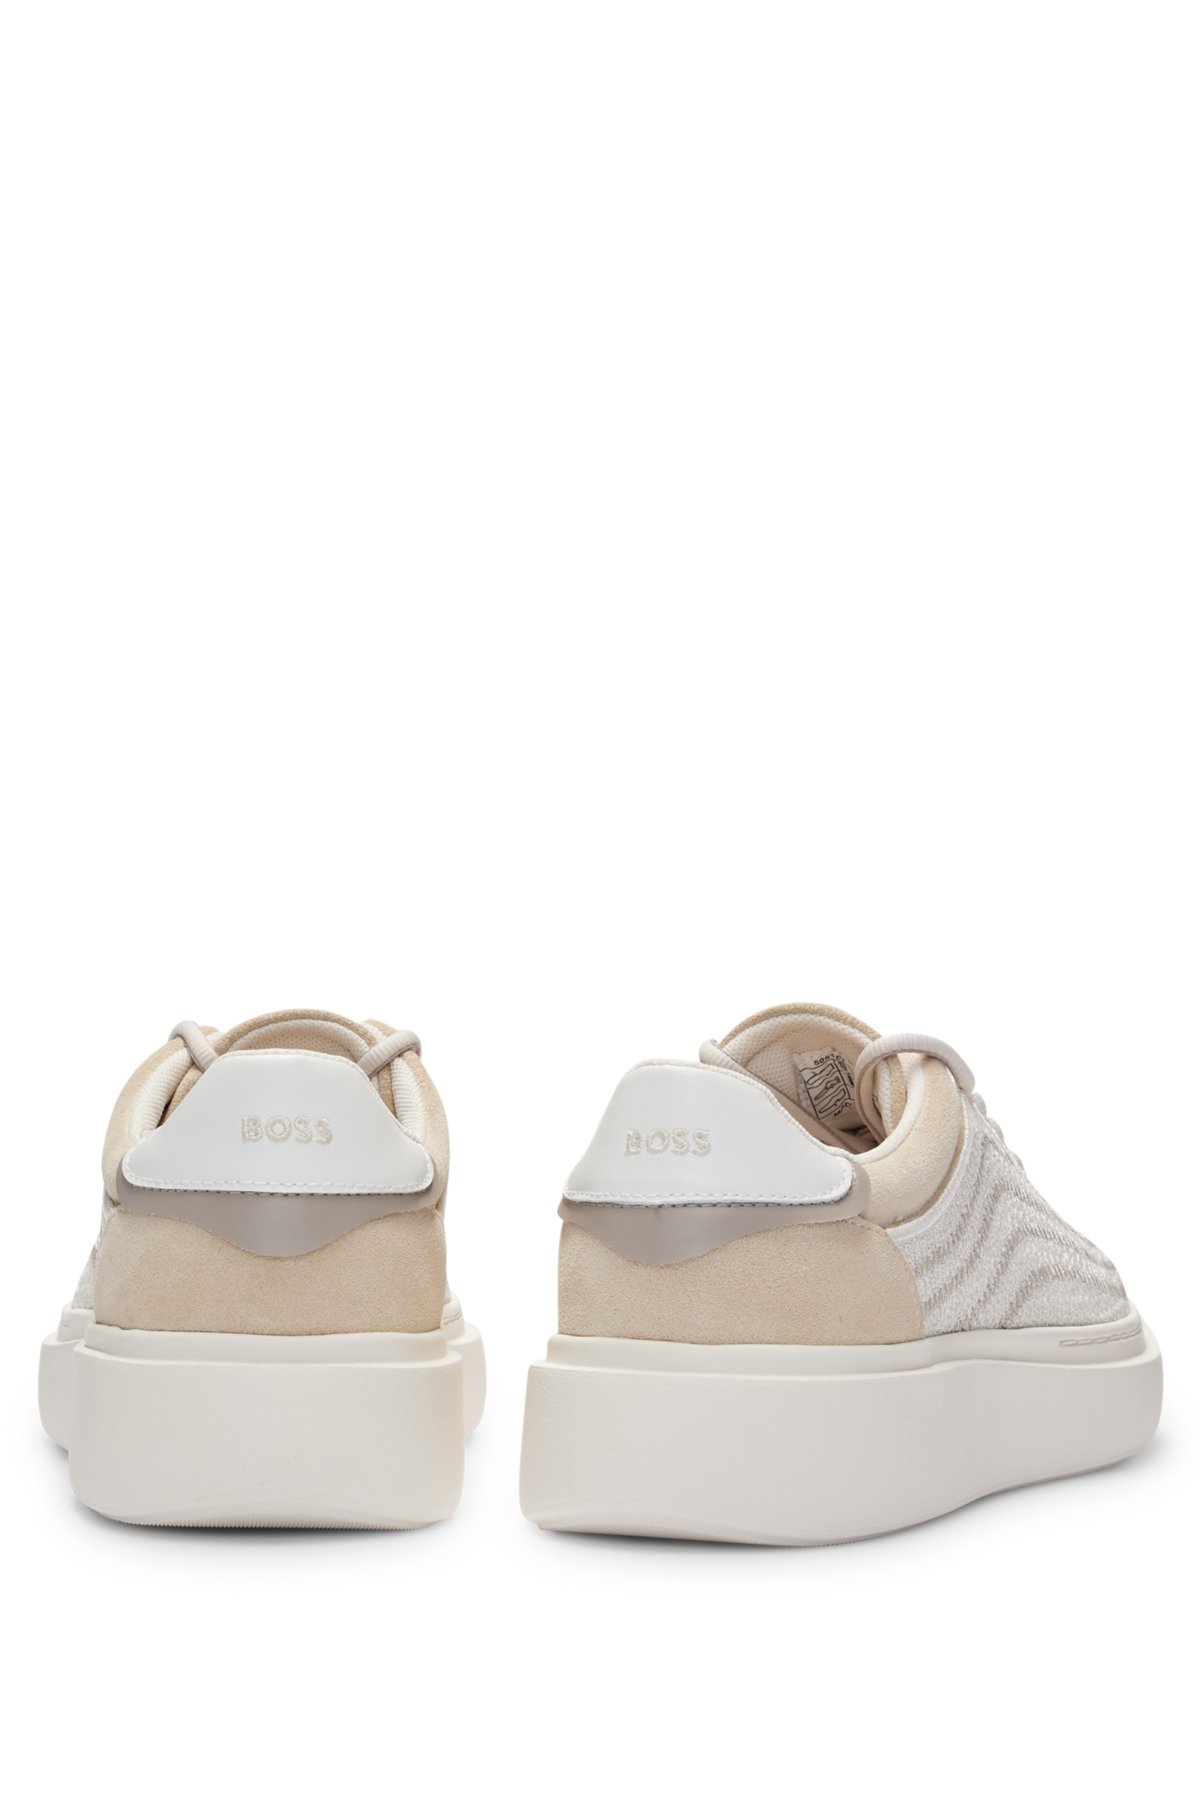 Lace-up trainers with zig-zag mesh and suede , Natural